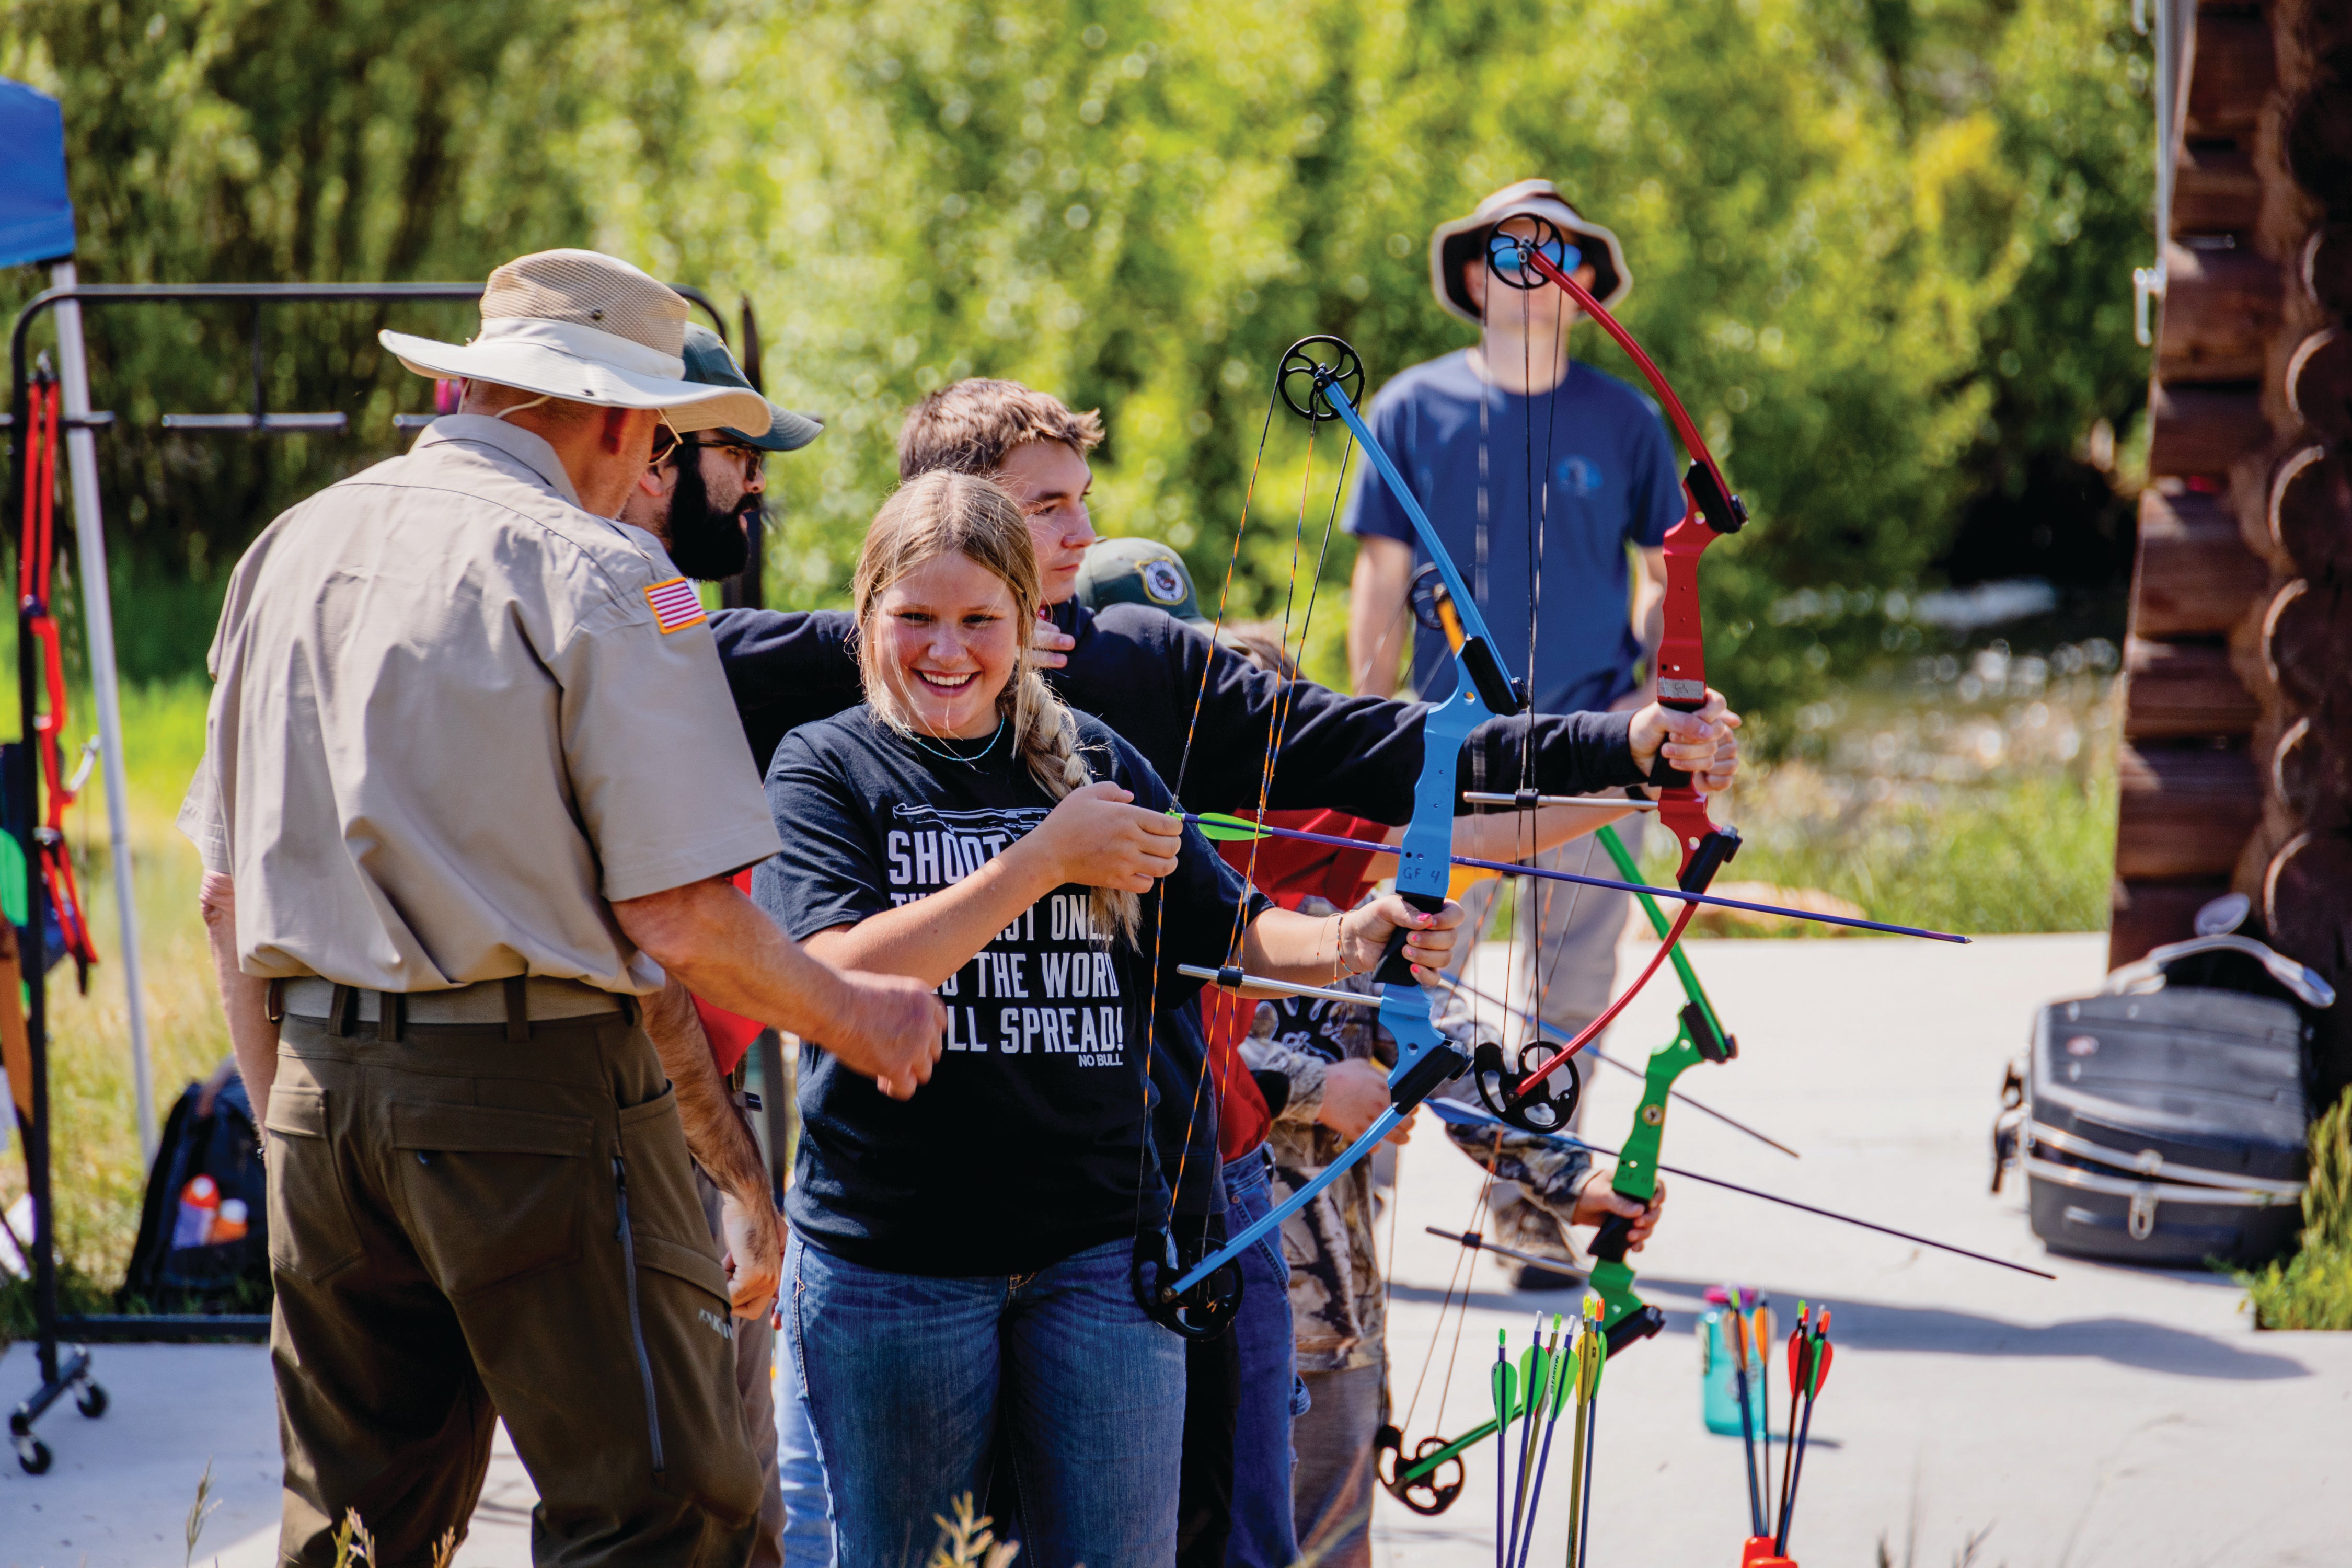 A girl gaining hands-on instruction and experience shooting a compound bow at an education event.